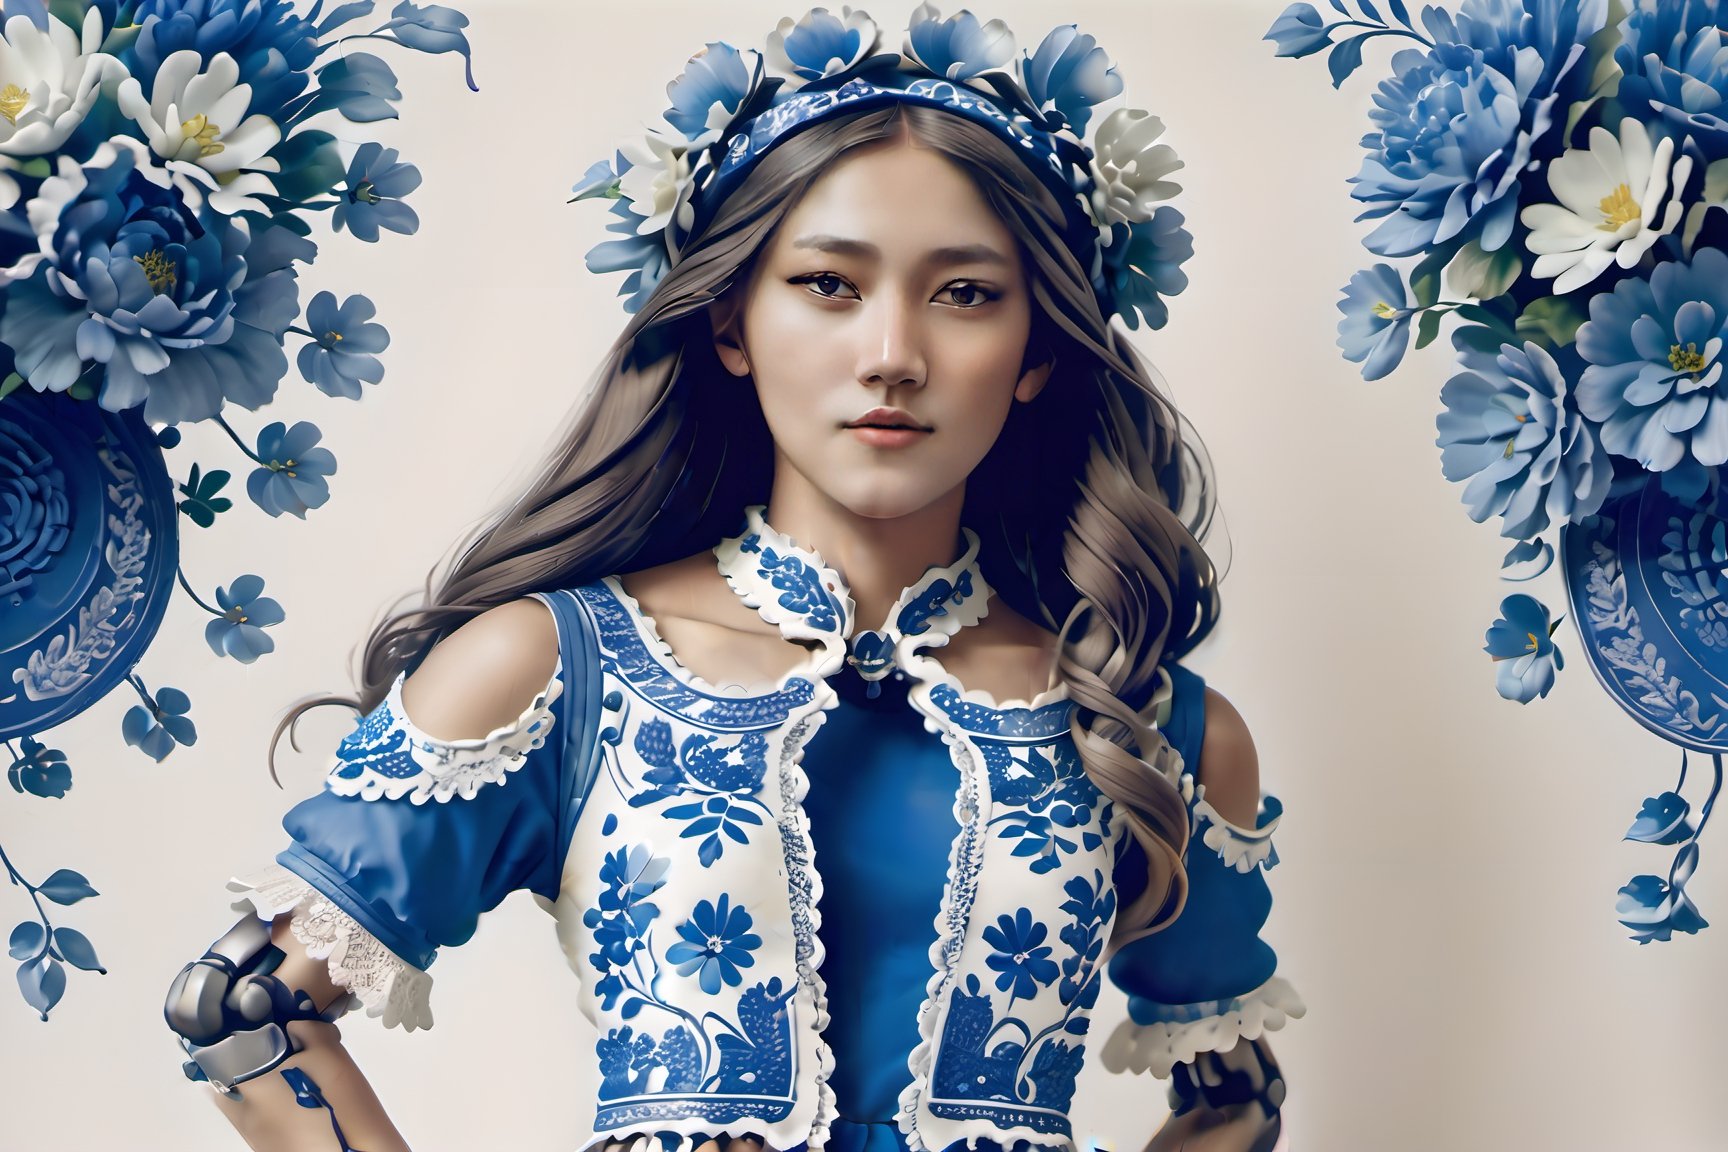 Upple portrait of a woman in a Delft's blue dress and a flower crown, young beautiful hippie girl, intrincate clothing, gemma chen, singer, wearing festive clothing, shipibo, white woman, 1 4. modern attire, mid length portrait photograph, a beautiful teen-aged girl